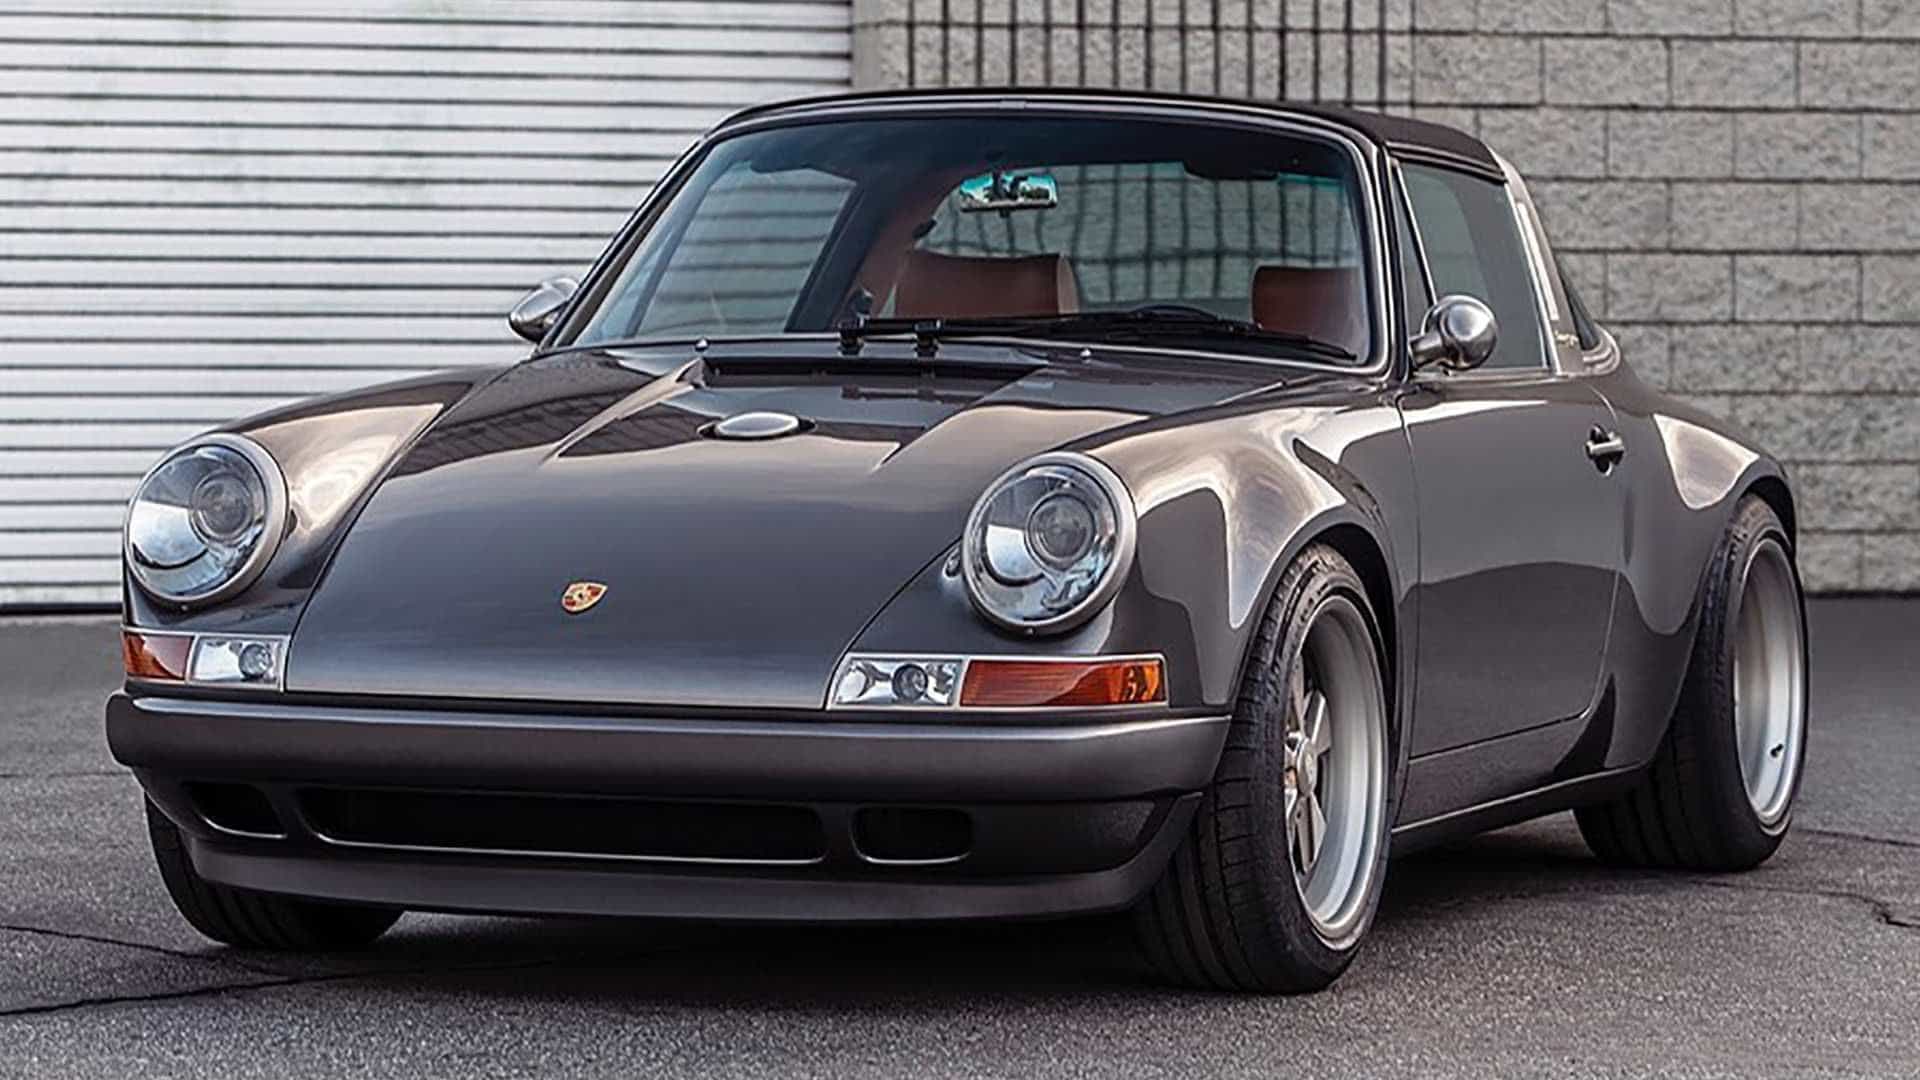 Singer 911 Honor Roll Commission